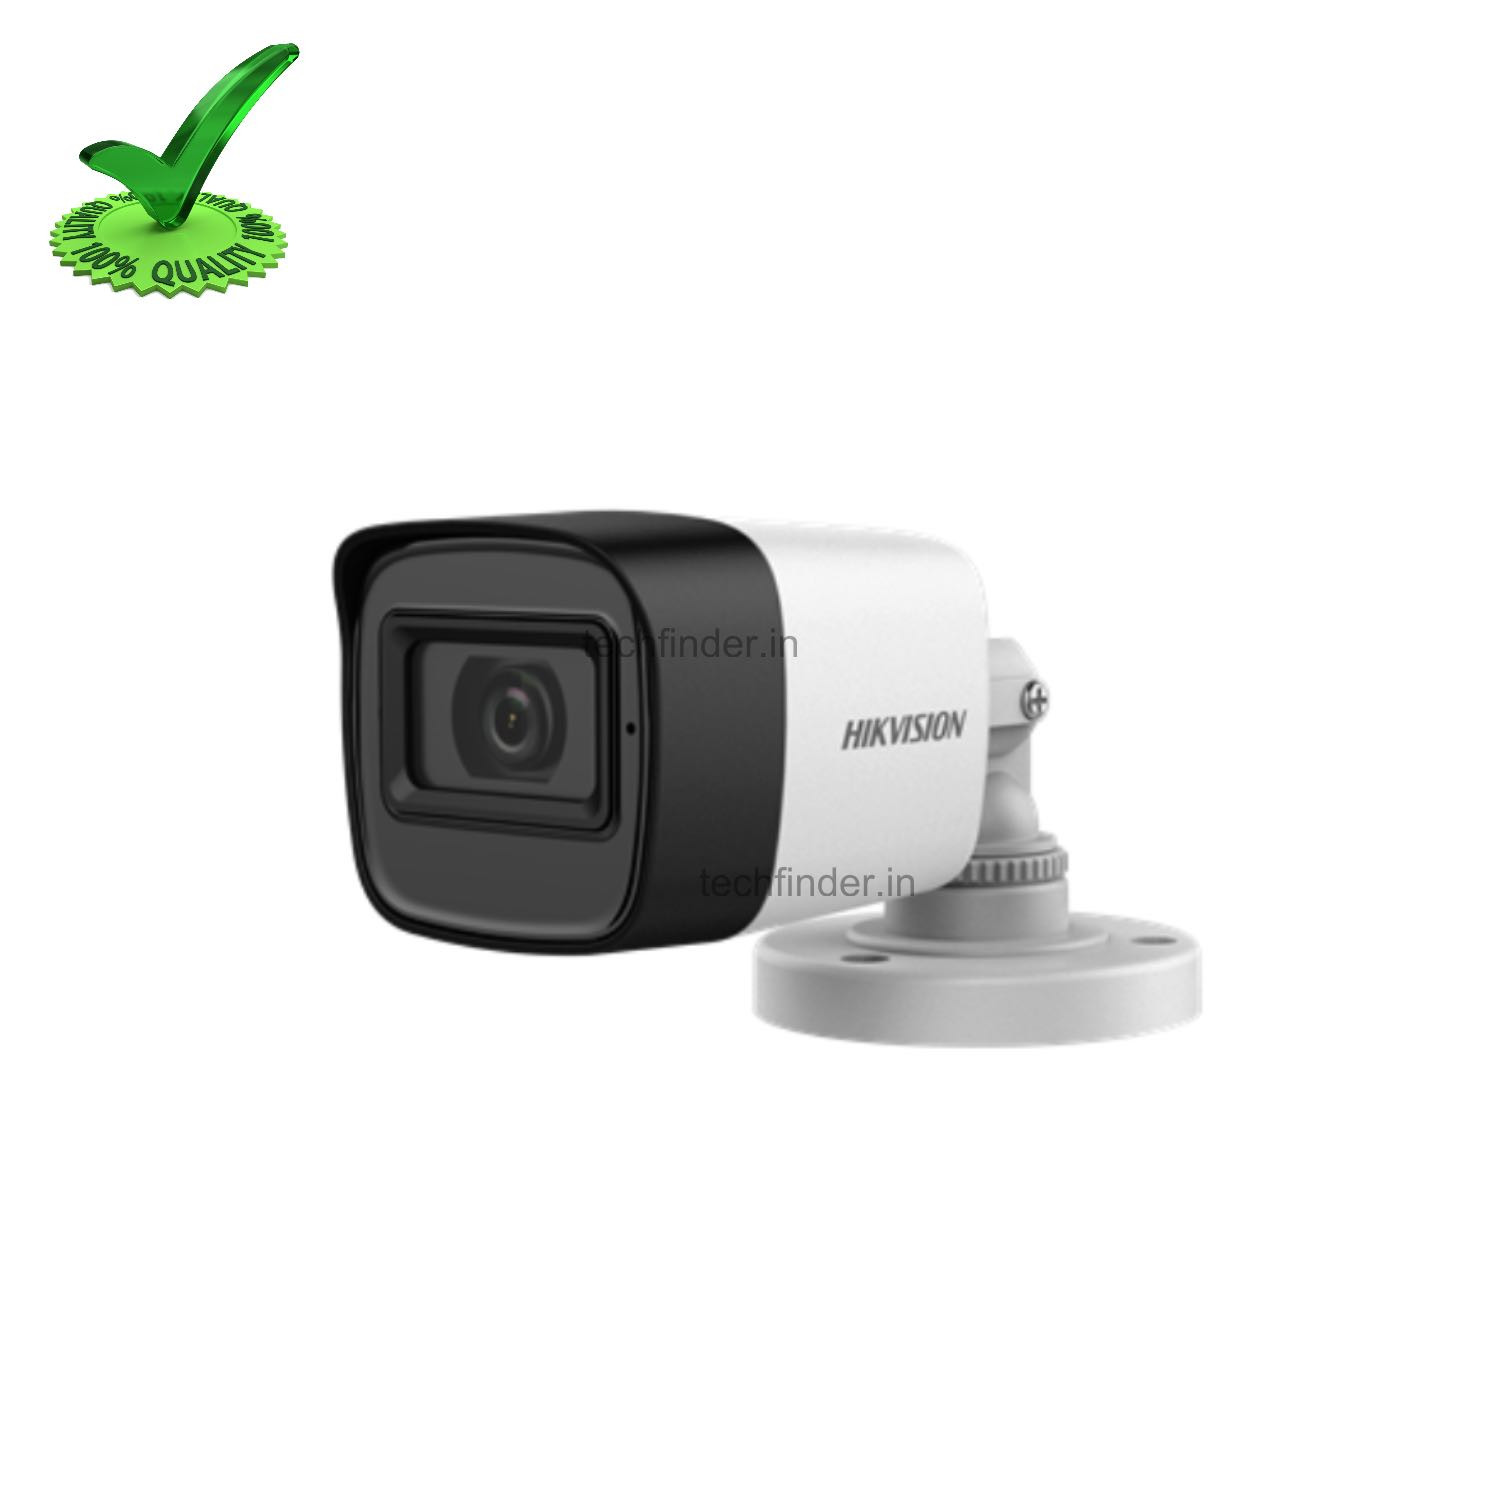 Hikvision DS-2CE16H0T-ITFS 5MP Fully Metal HD Bullet Camea